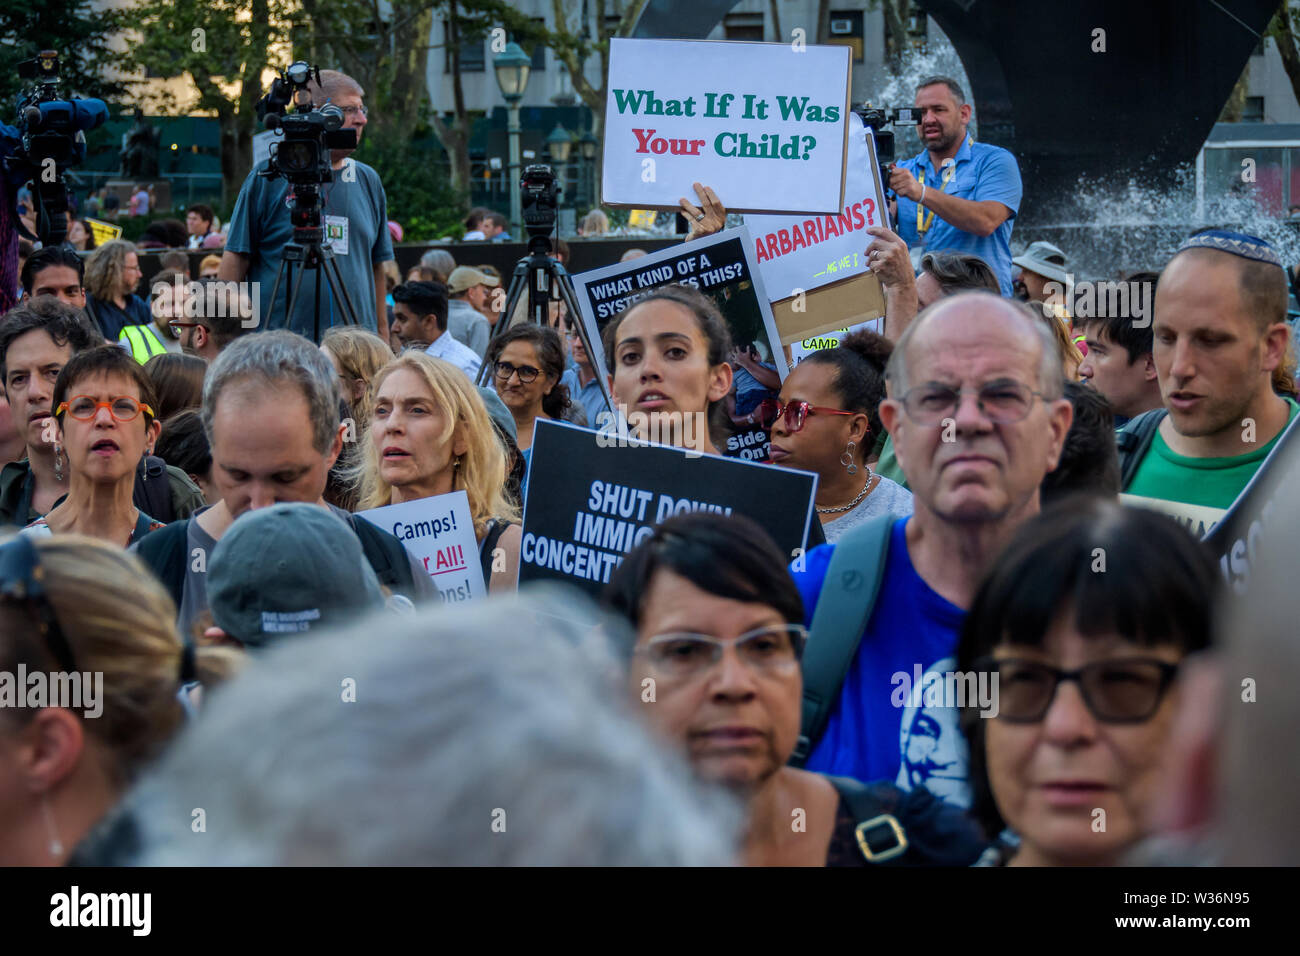 New York, USA. 12th July, 2019. Thousands of advocates, activists and community members flooded the streets at Foley Square, across from the Immigration and Customs Enforcement (ICE) New York Field Office to join New Sanctuary Coalition and The New York Immigration Coalition at the Lights for Liberty vigil, deemed one of the largest solidarity actions in history with over 750 vigils across 5 continents. A light was lit for all those held in U.S. detention camps and to bring light to the darkness of the Trump administration's horrific policies. Credit: ZUMA Press, Inc./Alamy Live News Stock Photo